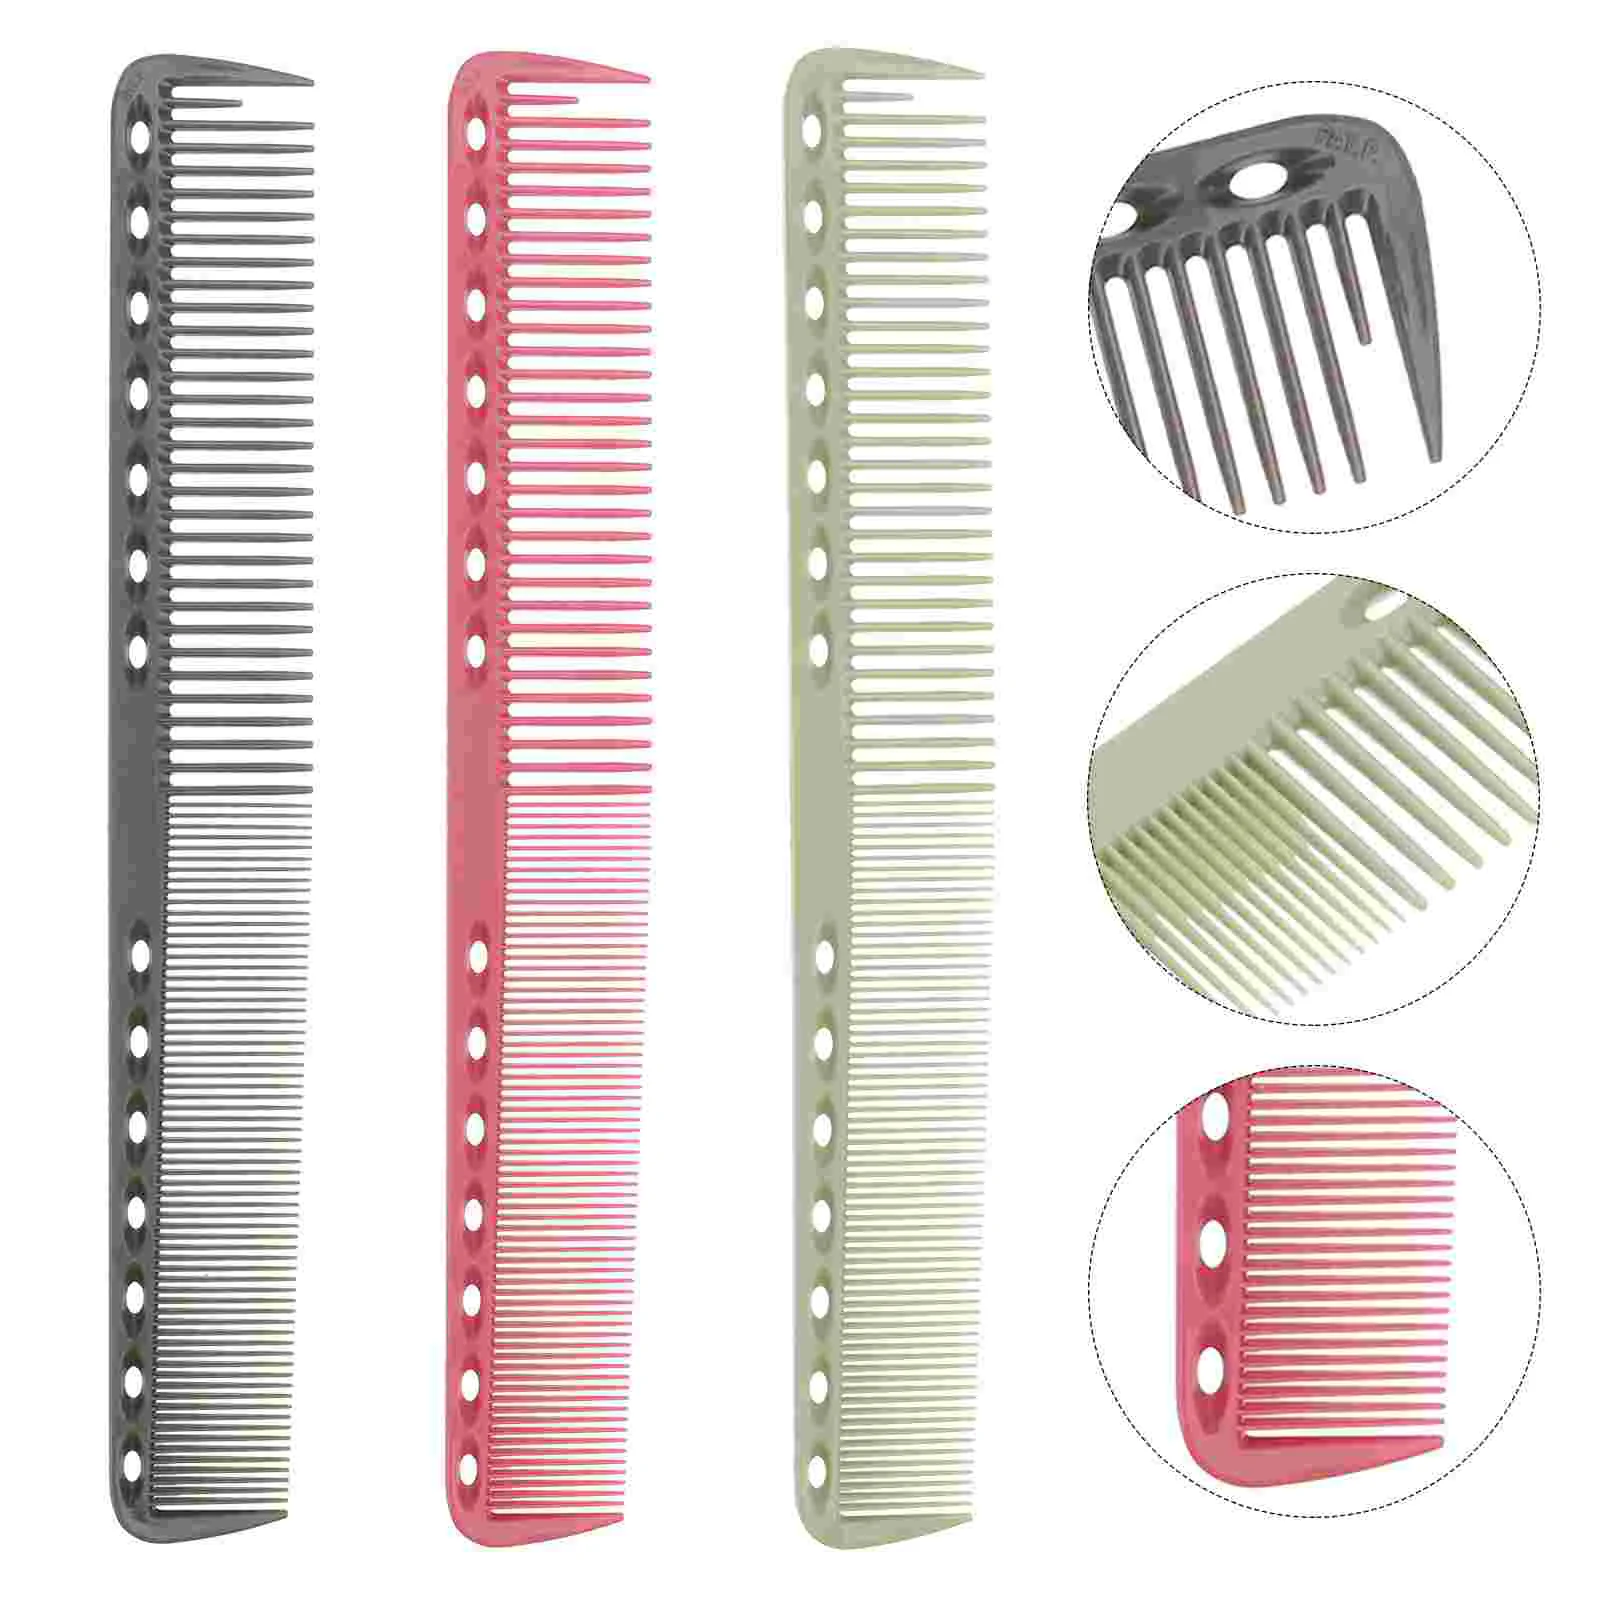 

Comb Hair Combs Setwomen Barber Haircut Hairdressing Anti Static Teeth Portable Salon Professional Stylist Cutting Sturdy